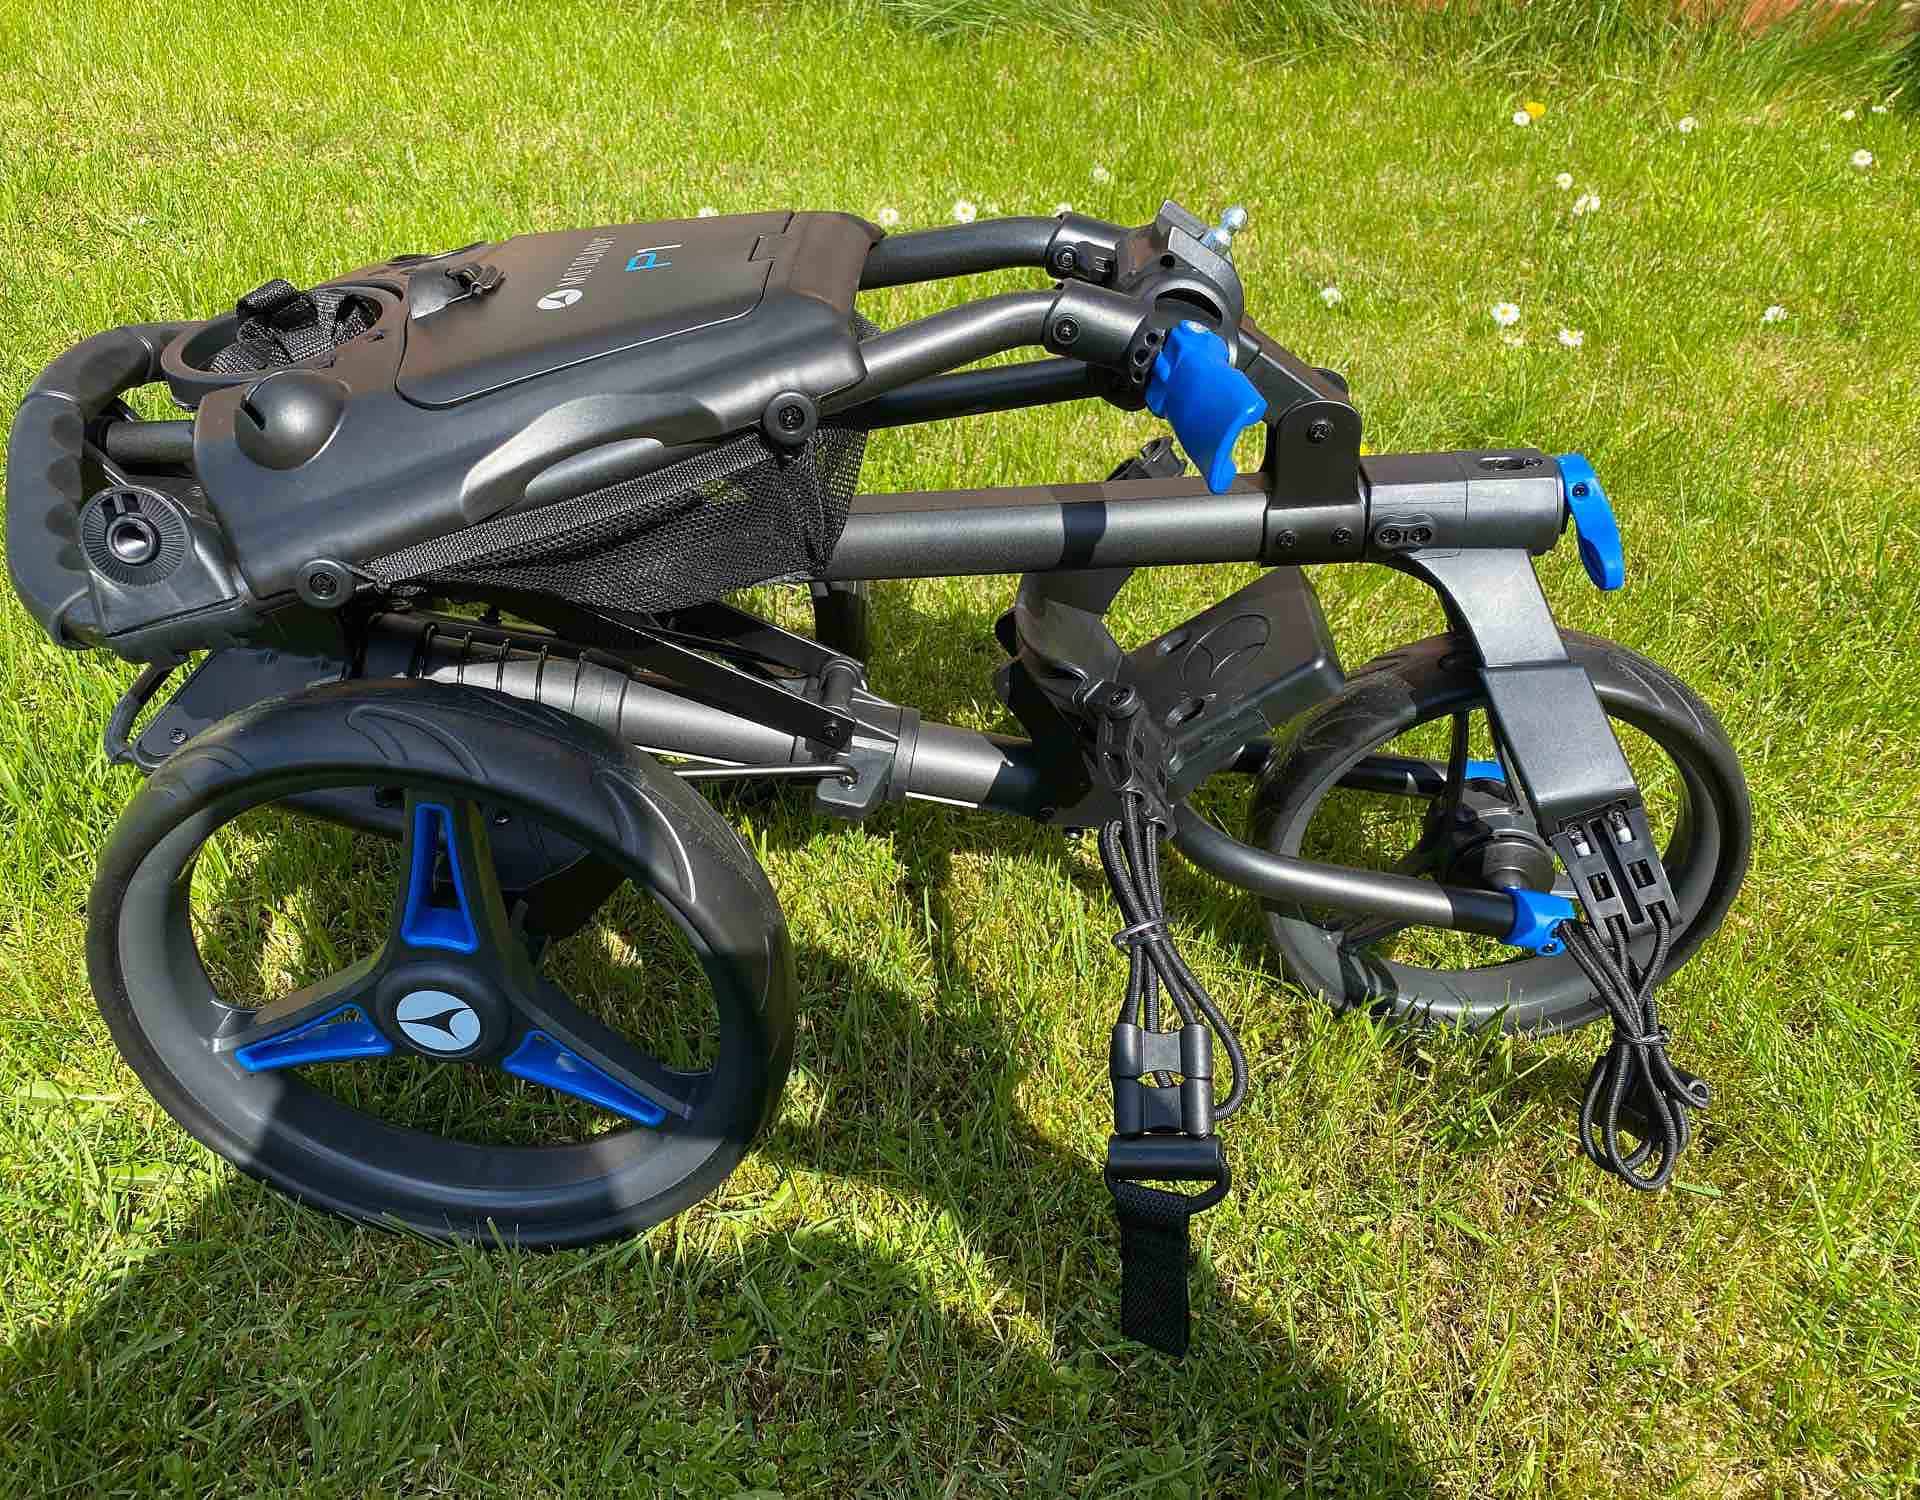 Motocaddy P1 Push Golf Trolley review